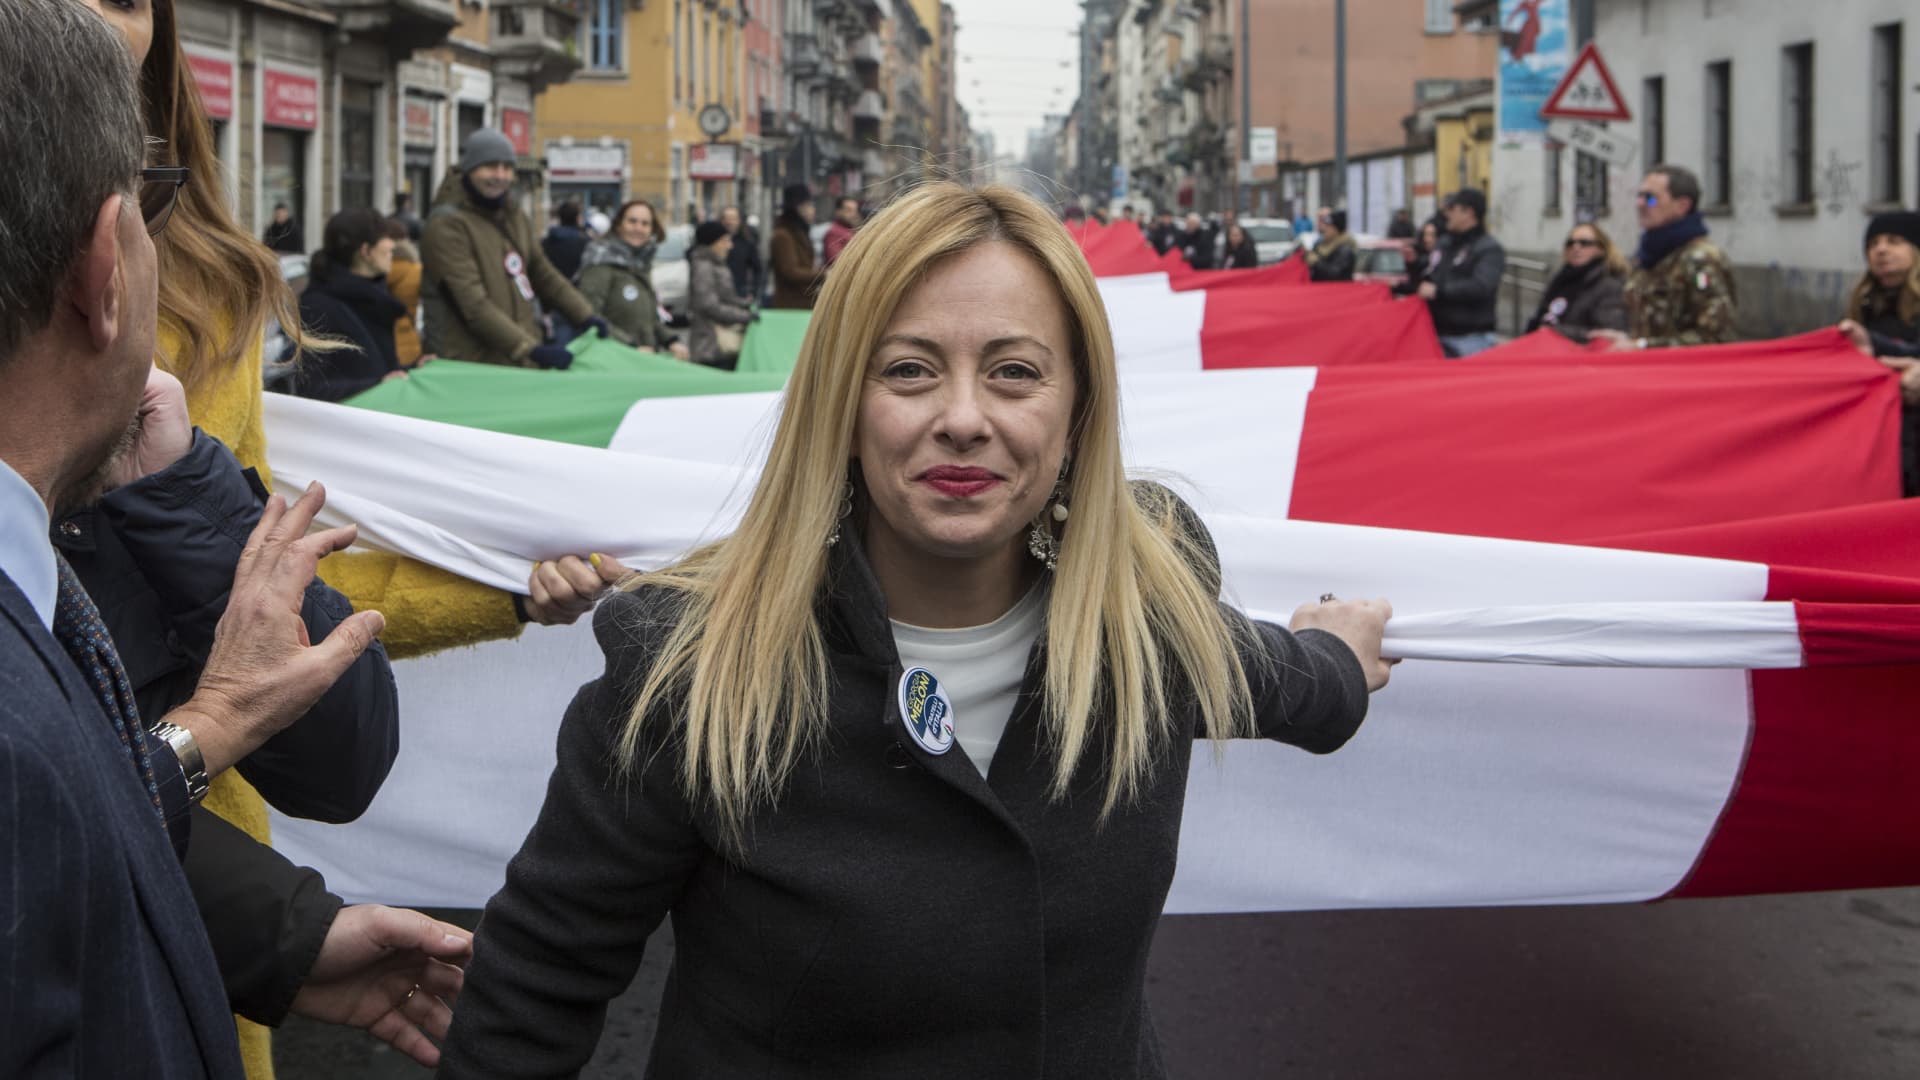 The far-right is expected to win Italy’s election in Rome’s biggest political shift for decades